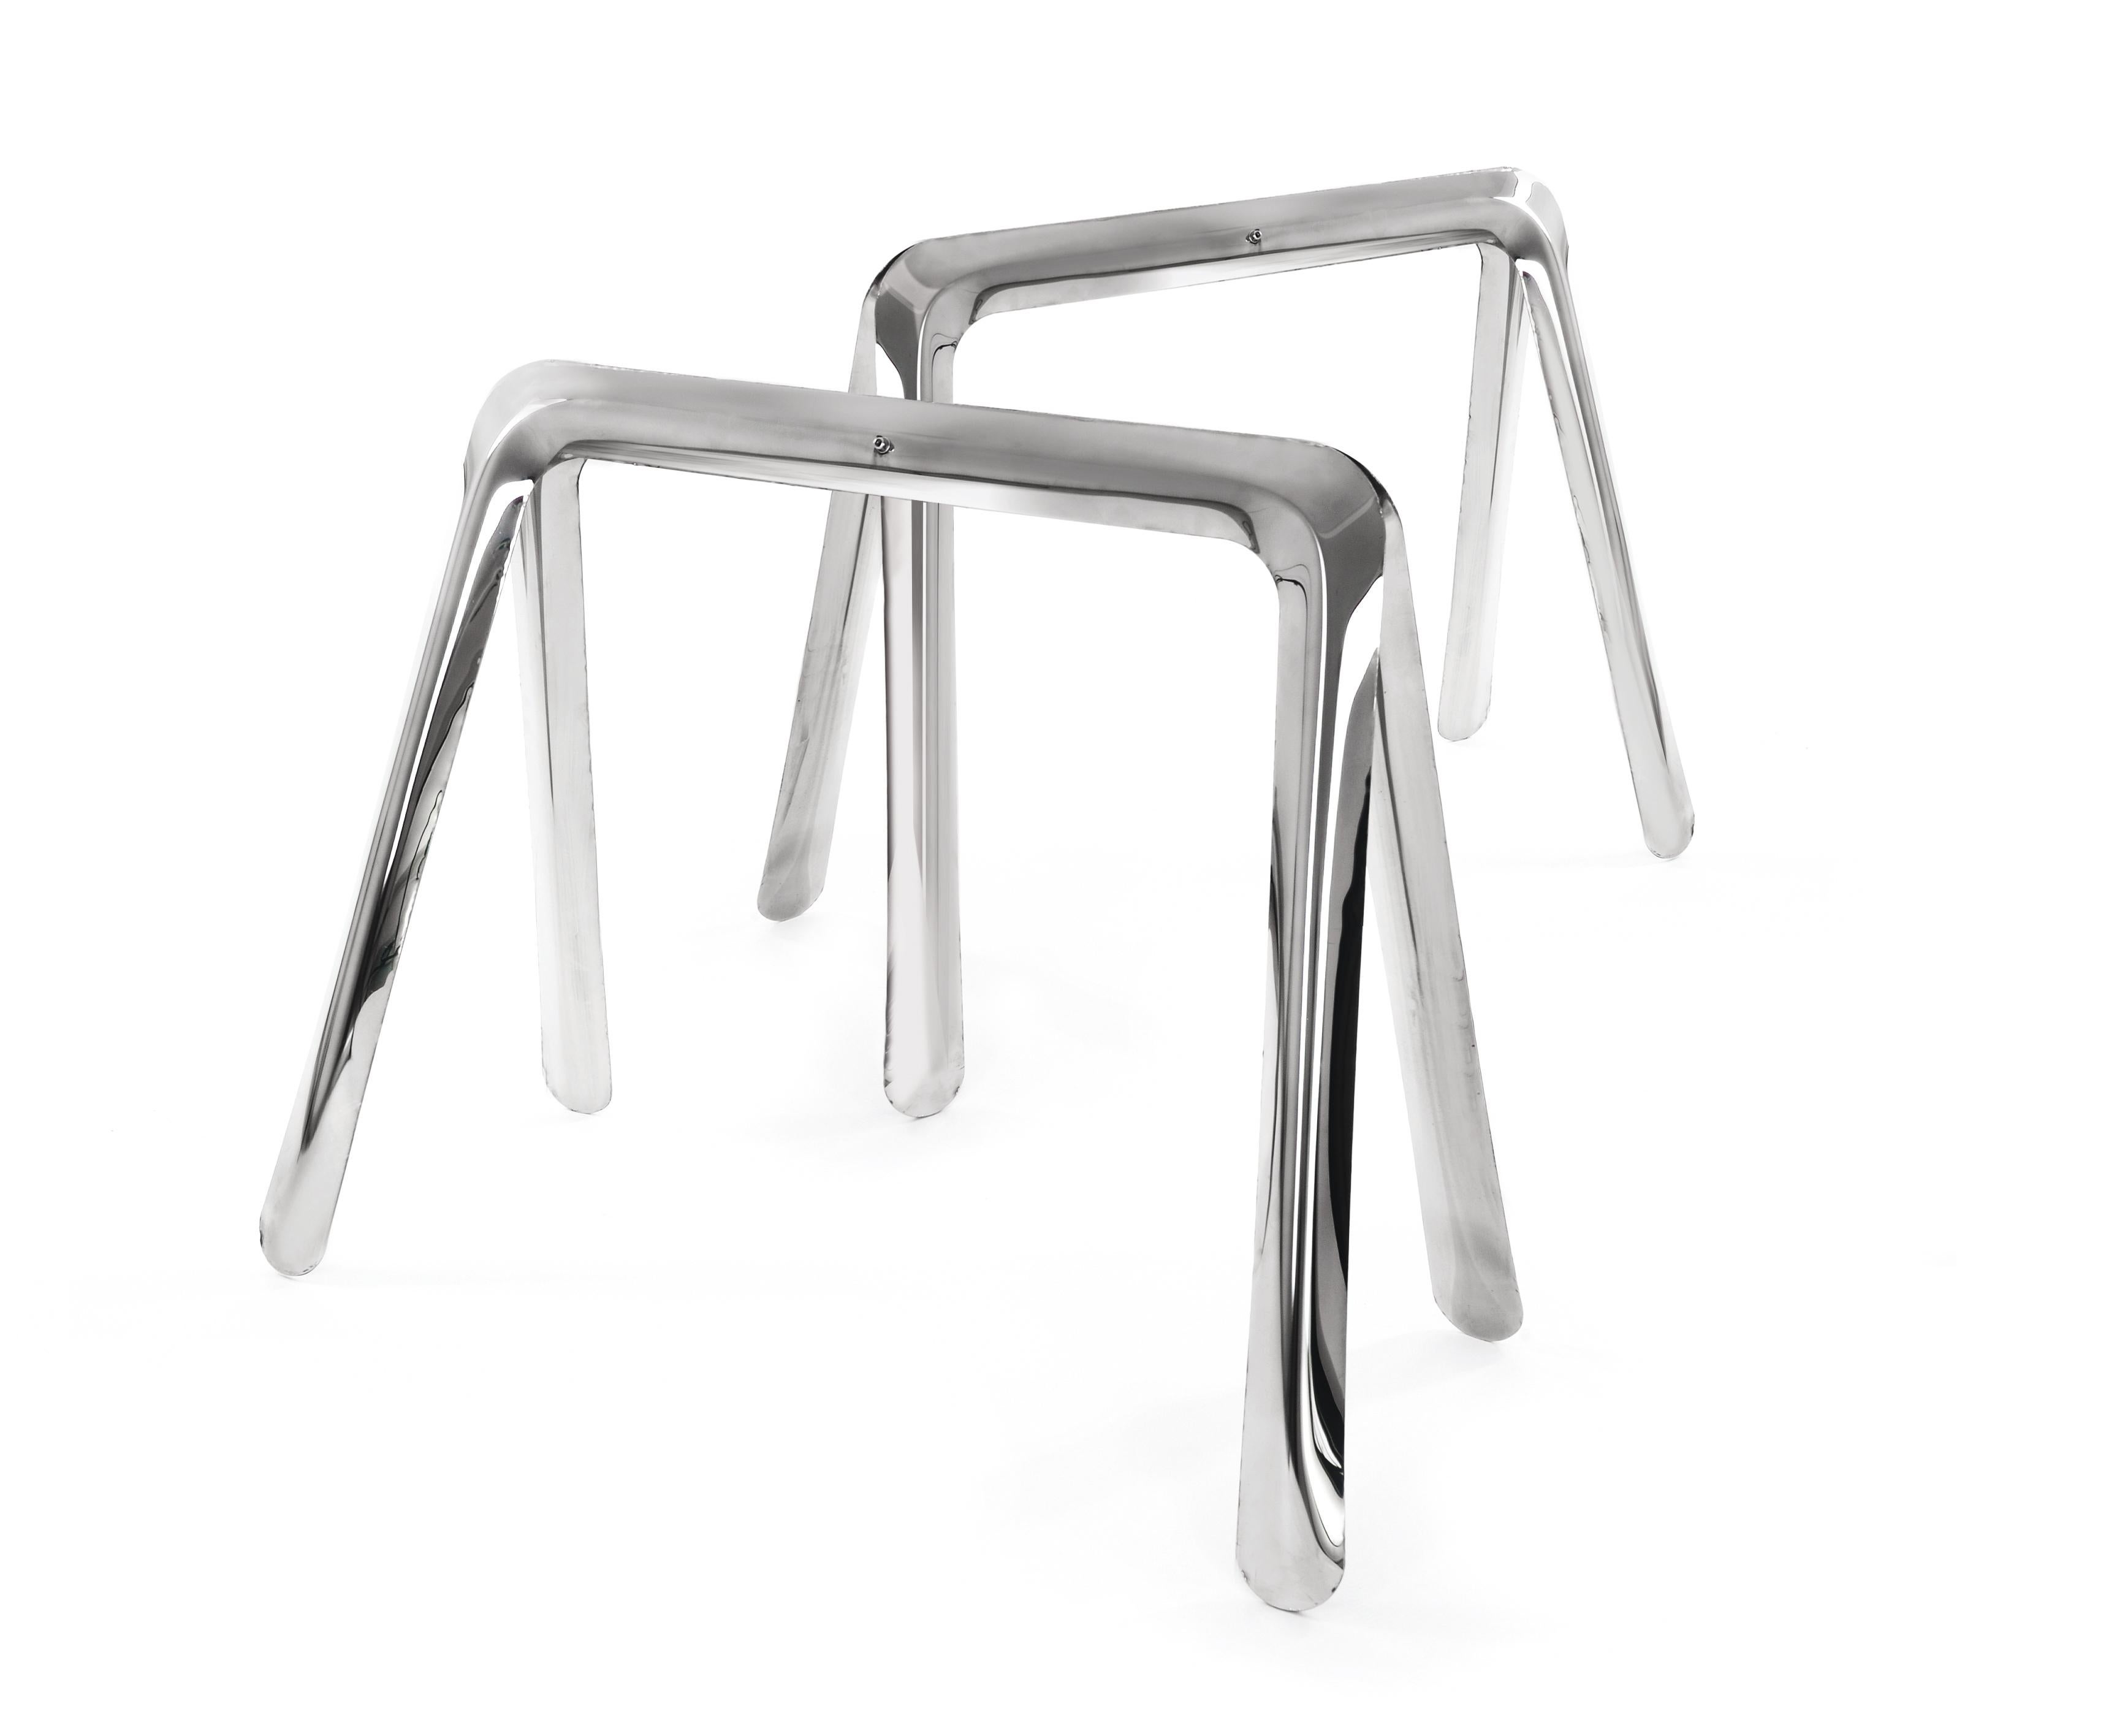 Pair of Koza trestles in stainless steel by Zieta
Dimensions: D 49 x W 96 x H 72 cm 
Material: Stainless steel.
Available in carbon steel.

Flexible forming fits well all flexible solutions. Pure line of our trestle Koza is an effect of careful